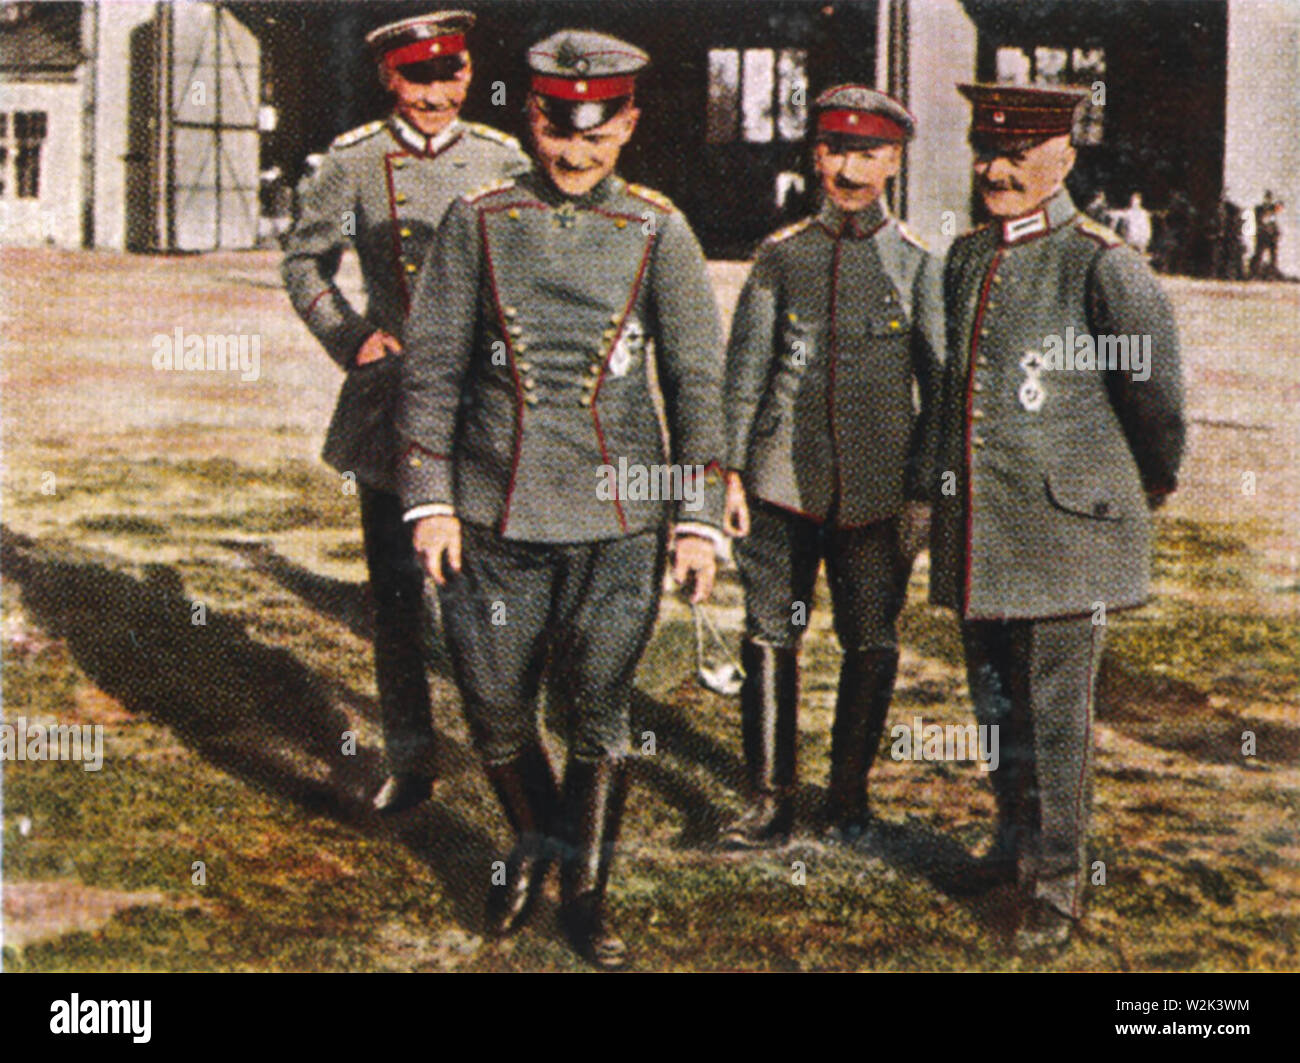 MANFRED von RICHTHOFEN (1892-1918) German fighter pilot in WW1 shown second from left on a contemporary German postcard Stock Photo